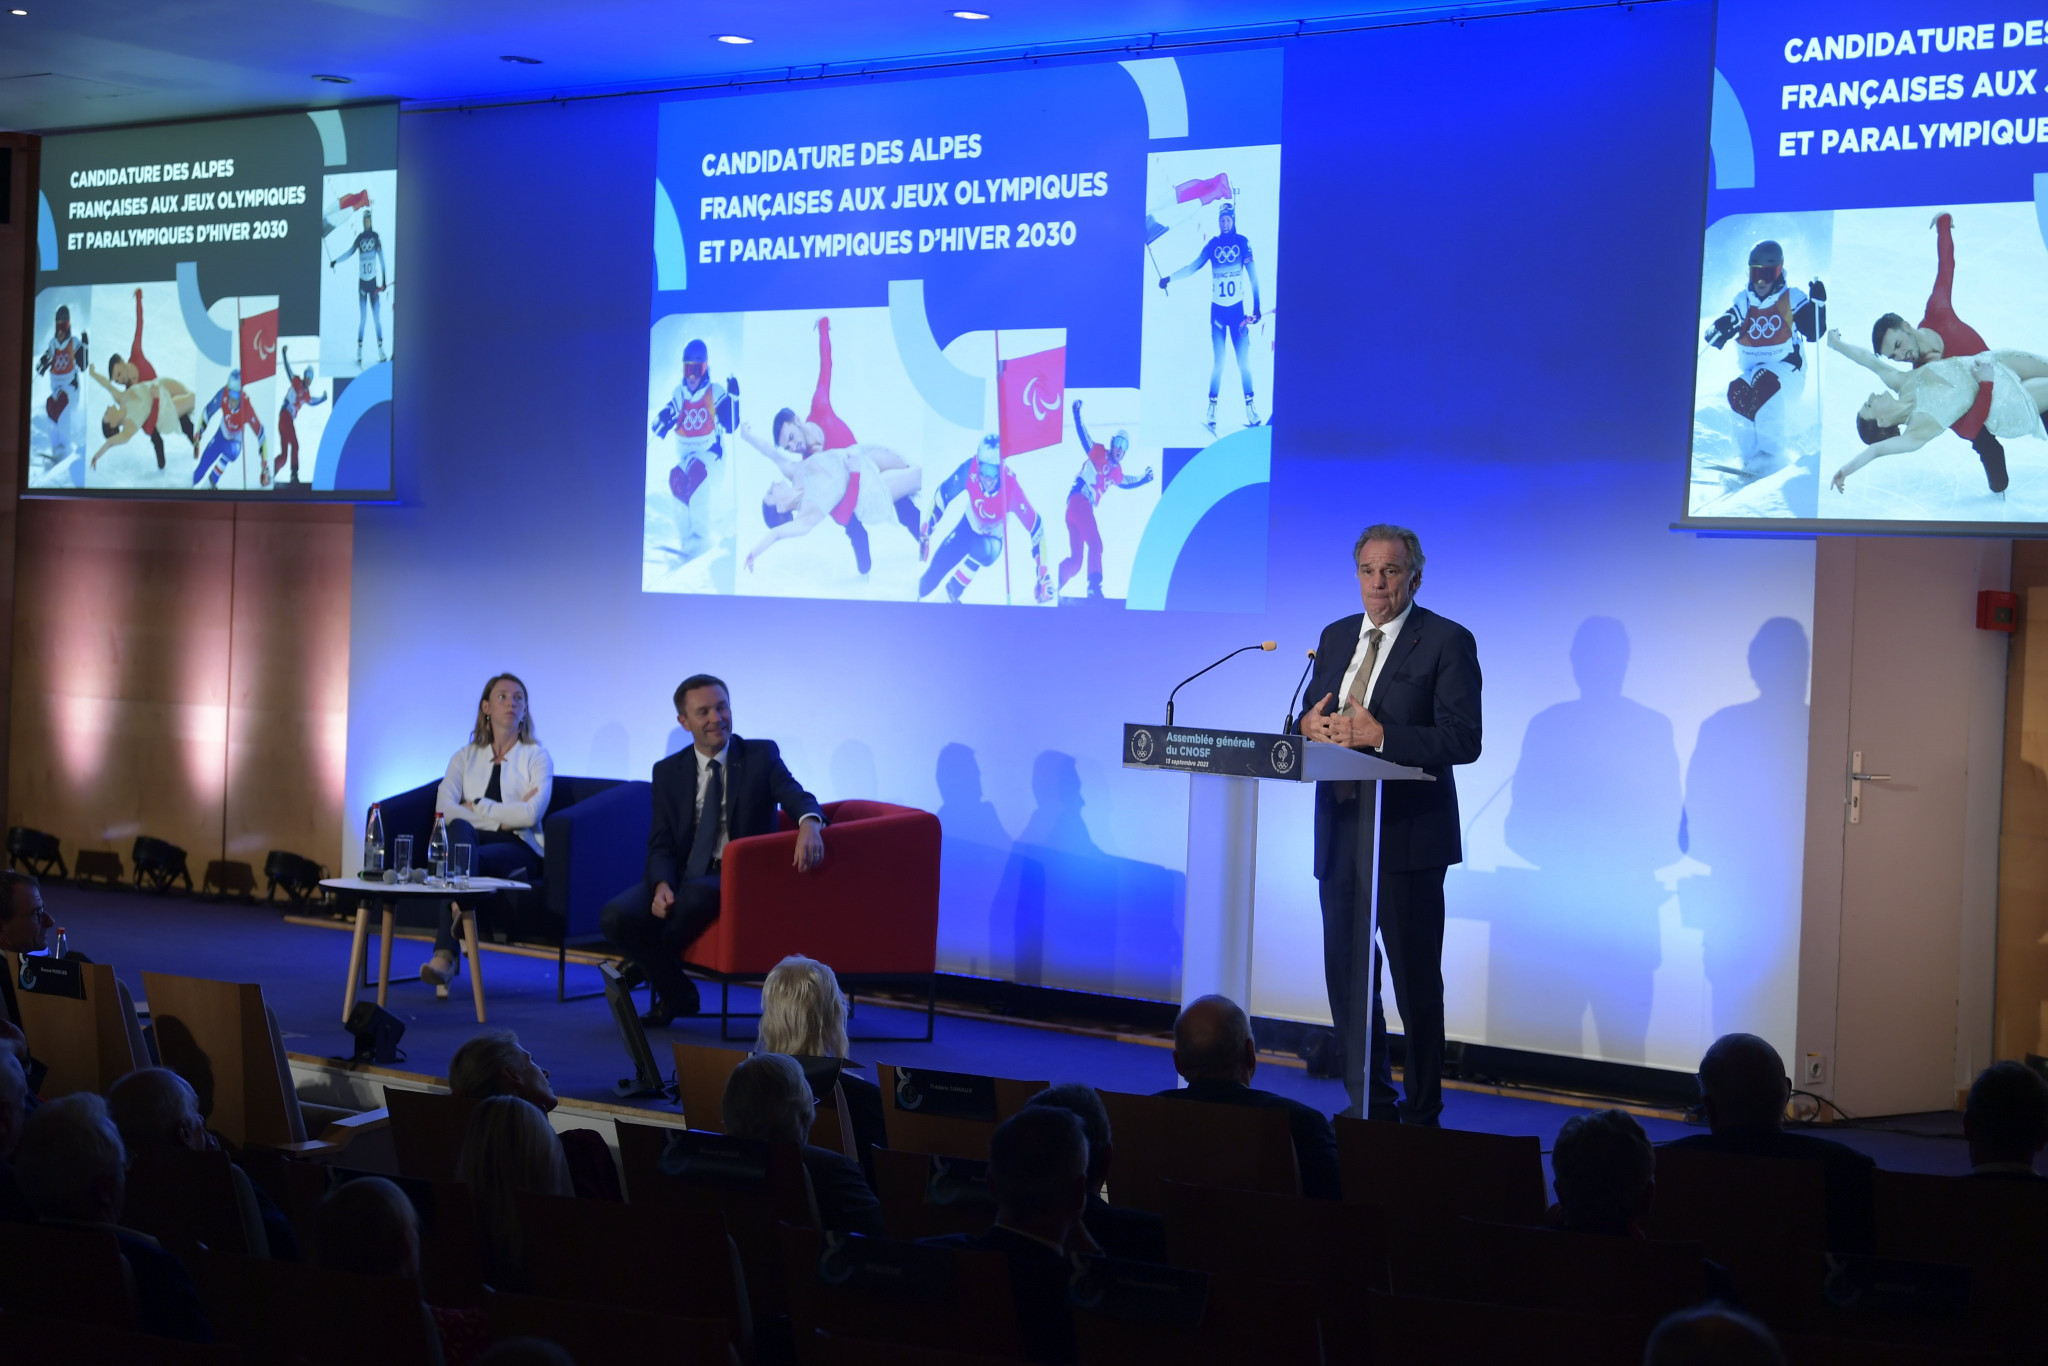 France's plans to bid for the 2030 Winter Olympics and Paralympics were presented at yesterday's CNOSF General Assembly ©CNOSF